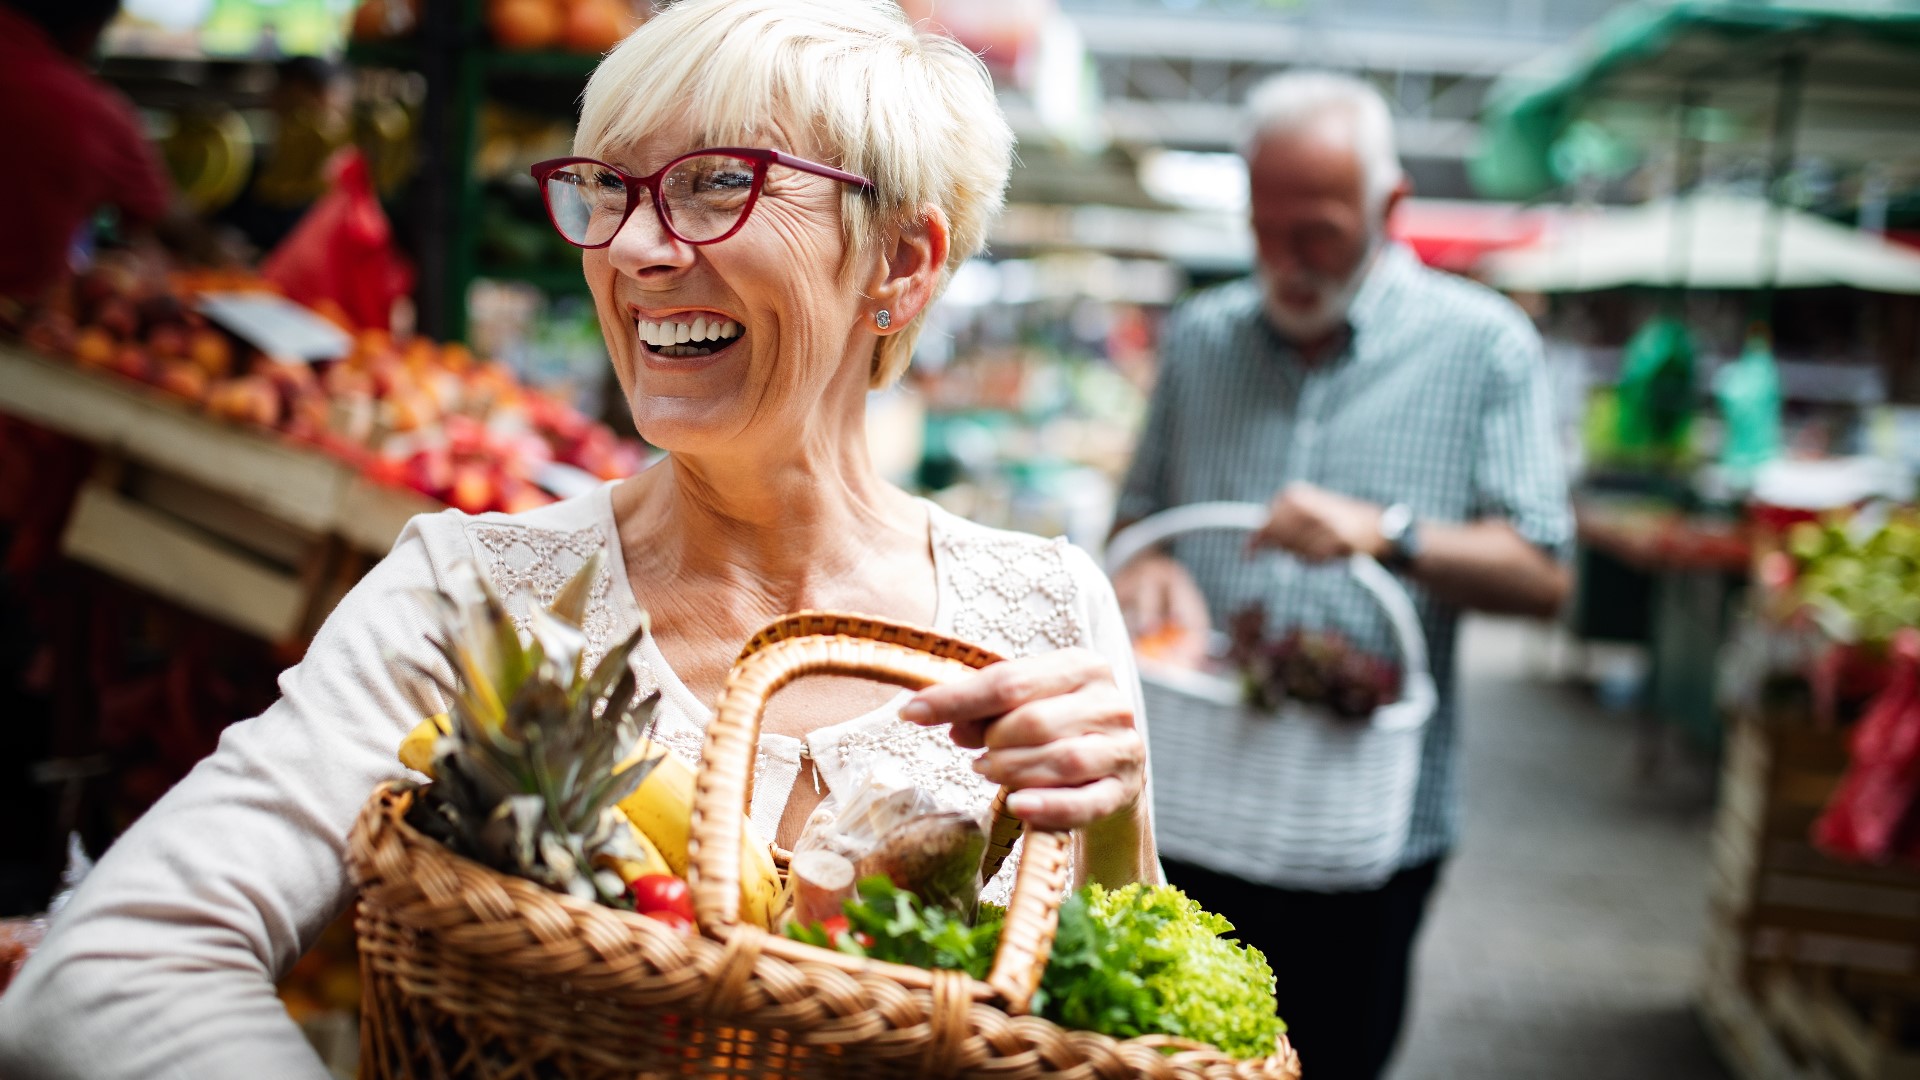 Seniors can get vitamins and minerals from fresh foods at local markets and group meal options at senior centers. Sponsored by Kaiser Permanente Washington.